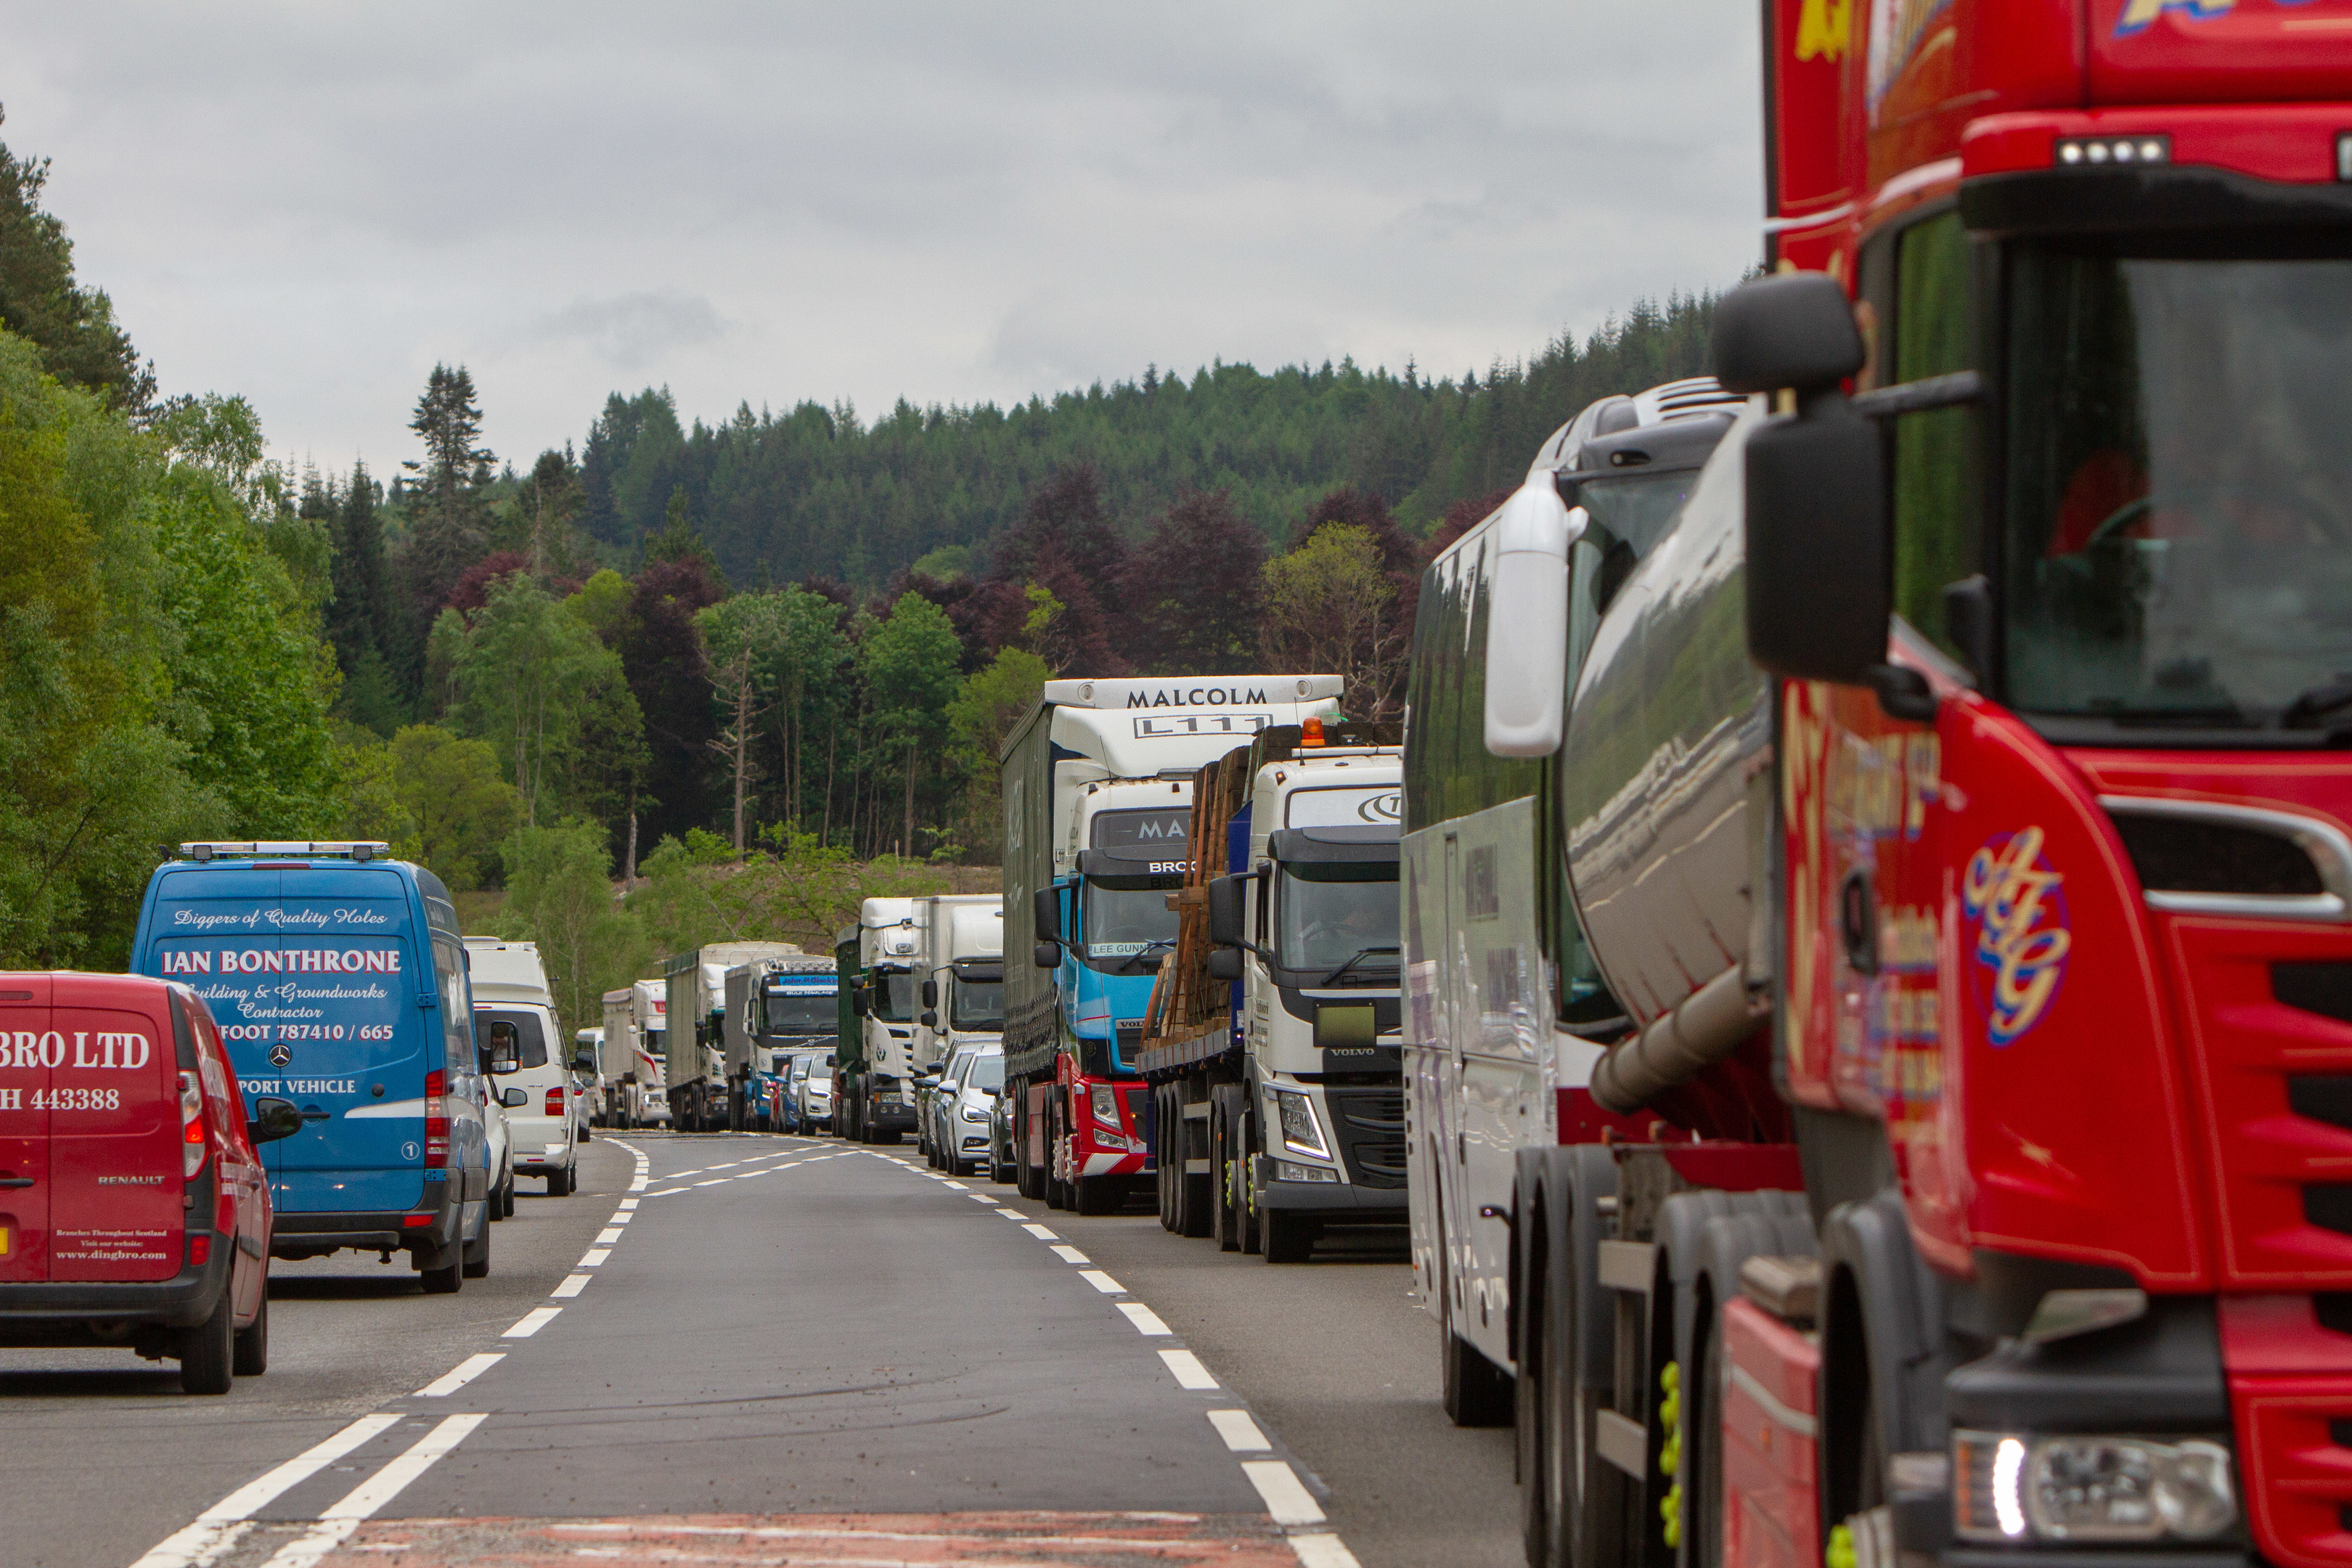 Stationary northbound traffic on the A9 dual carriageway near Dunkeld